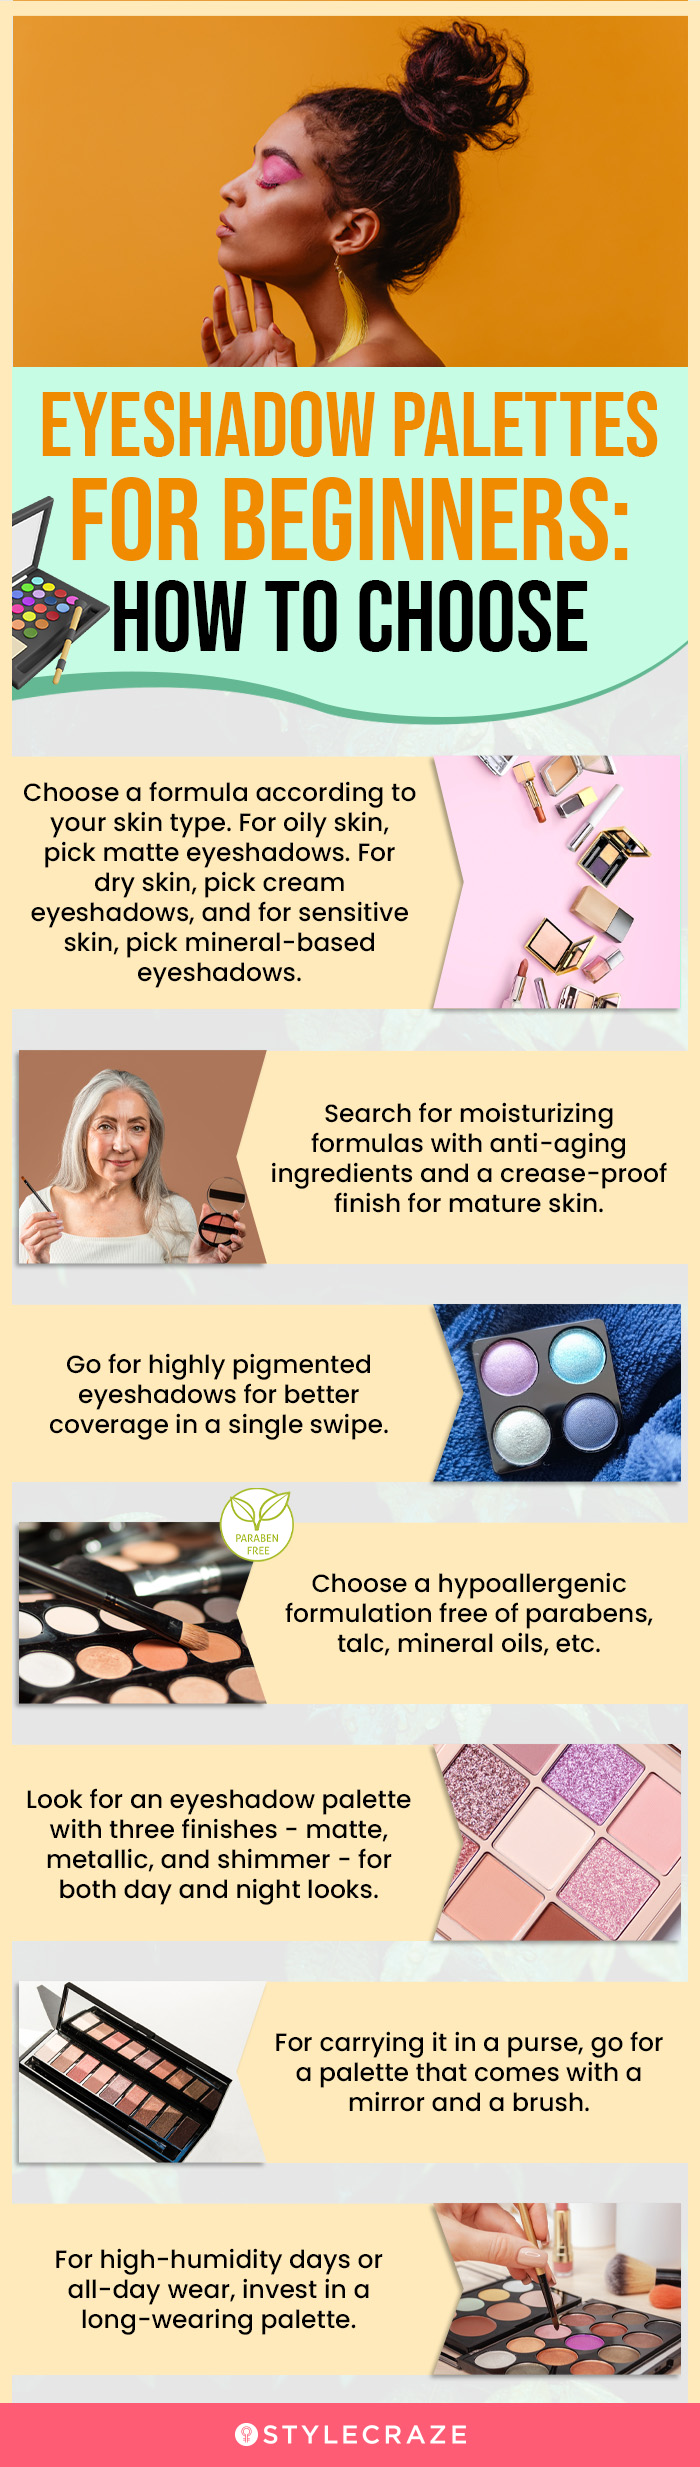 Eyeshadow Palettes For Beginners: How To Choose (infographic)